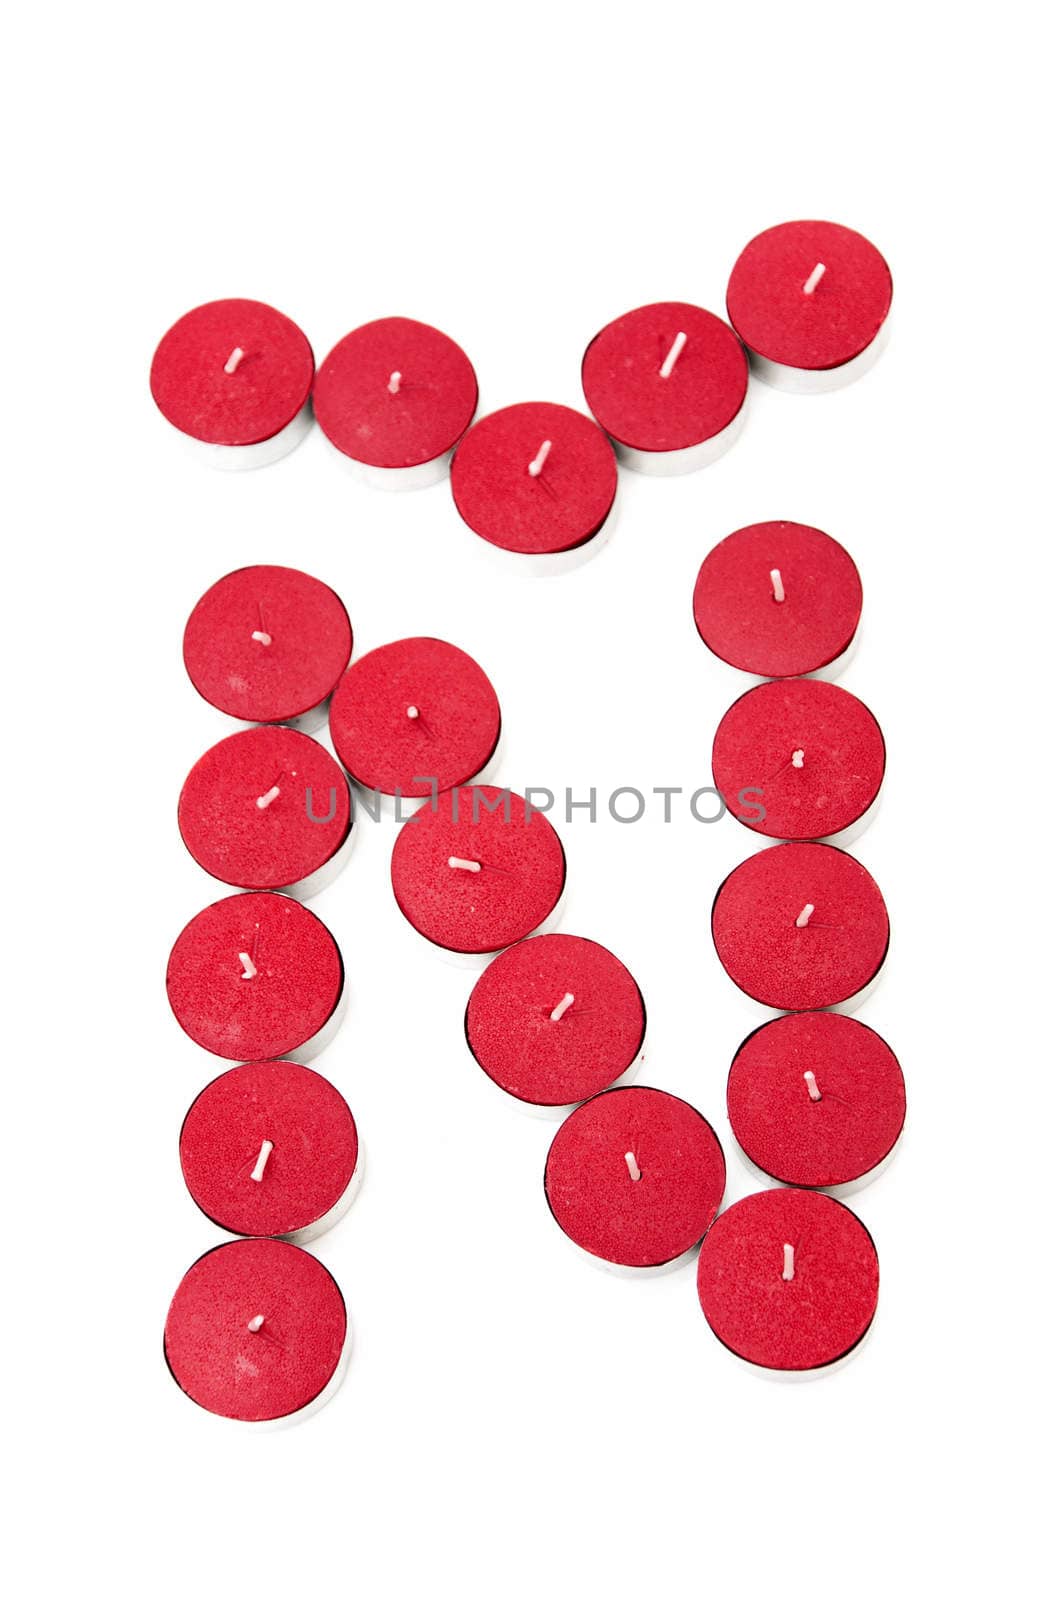 Letter � formed by candles on a white background